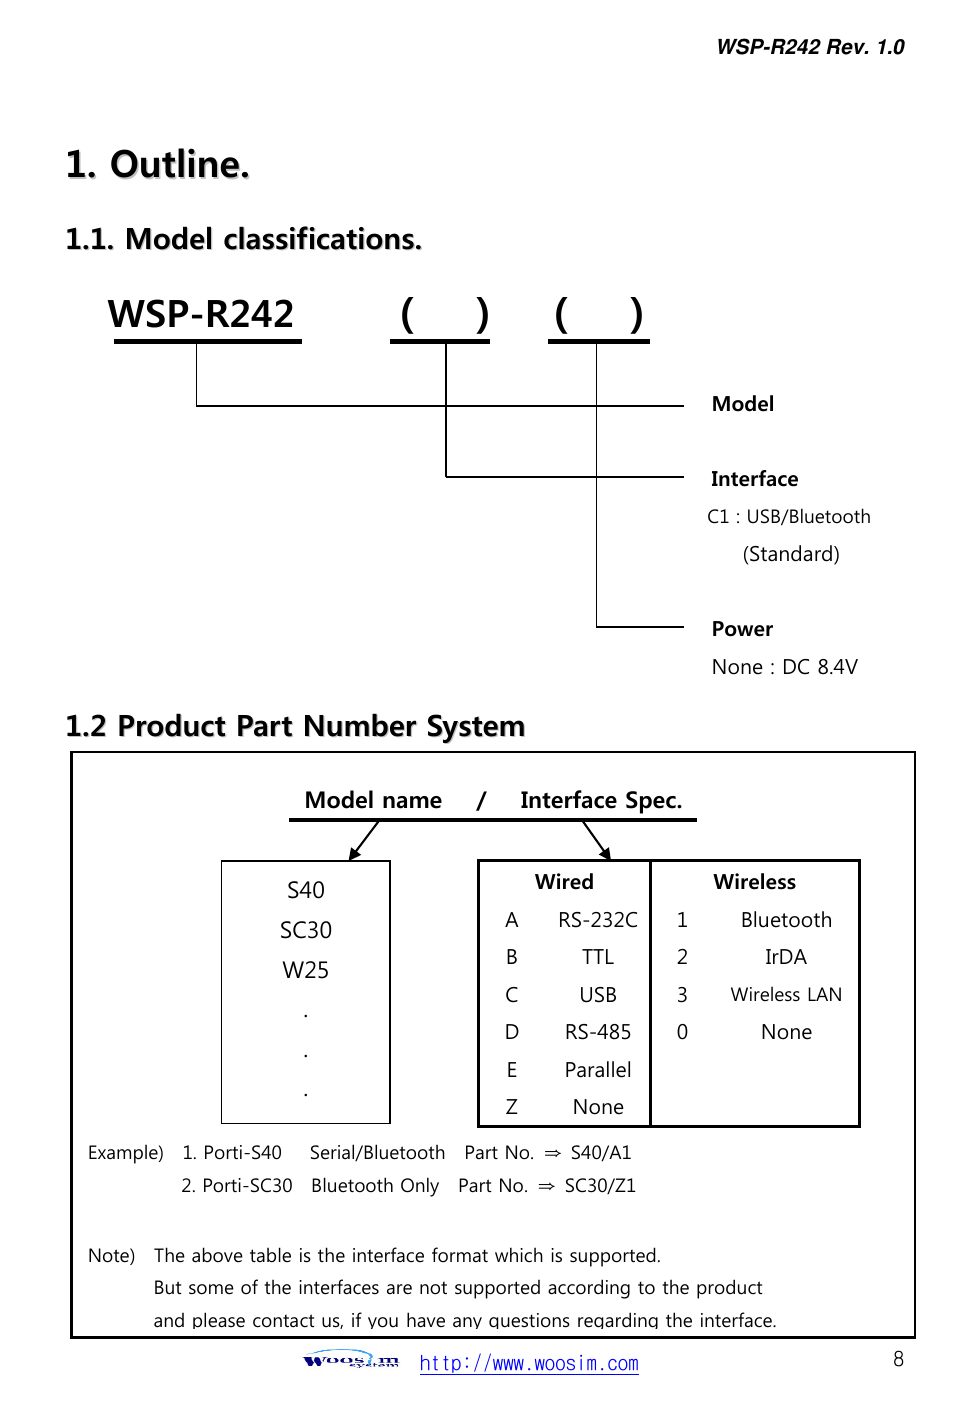 WSP-R242 Rev. 1.0   http://www.woosim.com 8 11..  OOuuttlliinnee..  11..11..  MMooddeell  ccllaassssiiffiiccaattiioonnss..             11..22  PPrroodduucctt  PPaarrtt  NNuummbbeerr  SSyysstteemm               WSP-R242          (      )      (    )      Model  Interface C1 : USB/Bluetooth     (Standard)  Power None : DC 8.4V                                                            Model name    /      Interface Spec.         Example)   1. Porti-S40     Serial/Bluetooth    Part No.  ⇒ S40/A1                 2. Porti-SC30   Bluetooth Only   Part No.  ⇒ SC30/Z1  Note)   The above table is the interface format which is supported. But some of the interfaces are not supported according to the product and please contact us, if you have any questions regarding the interface.  S40 SC30 W25 . . .  Wired Wireless A RS-232C 1 Bluetooth B TTL 2 IrDA C USB 3 Wireless LAN D RS-485 0 None E Parallel   Z None    